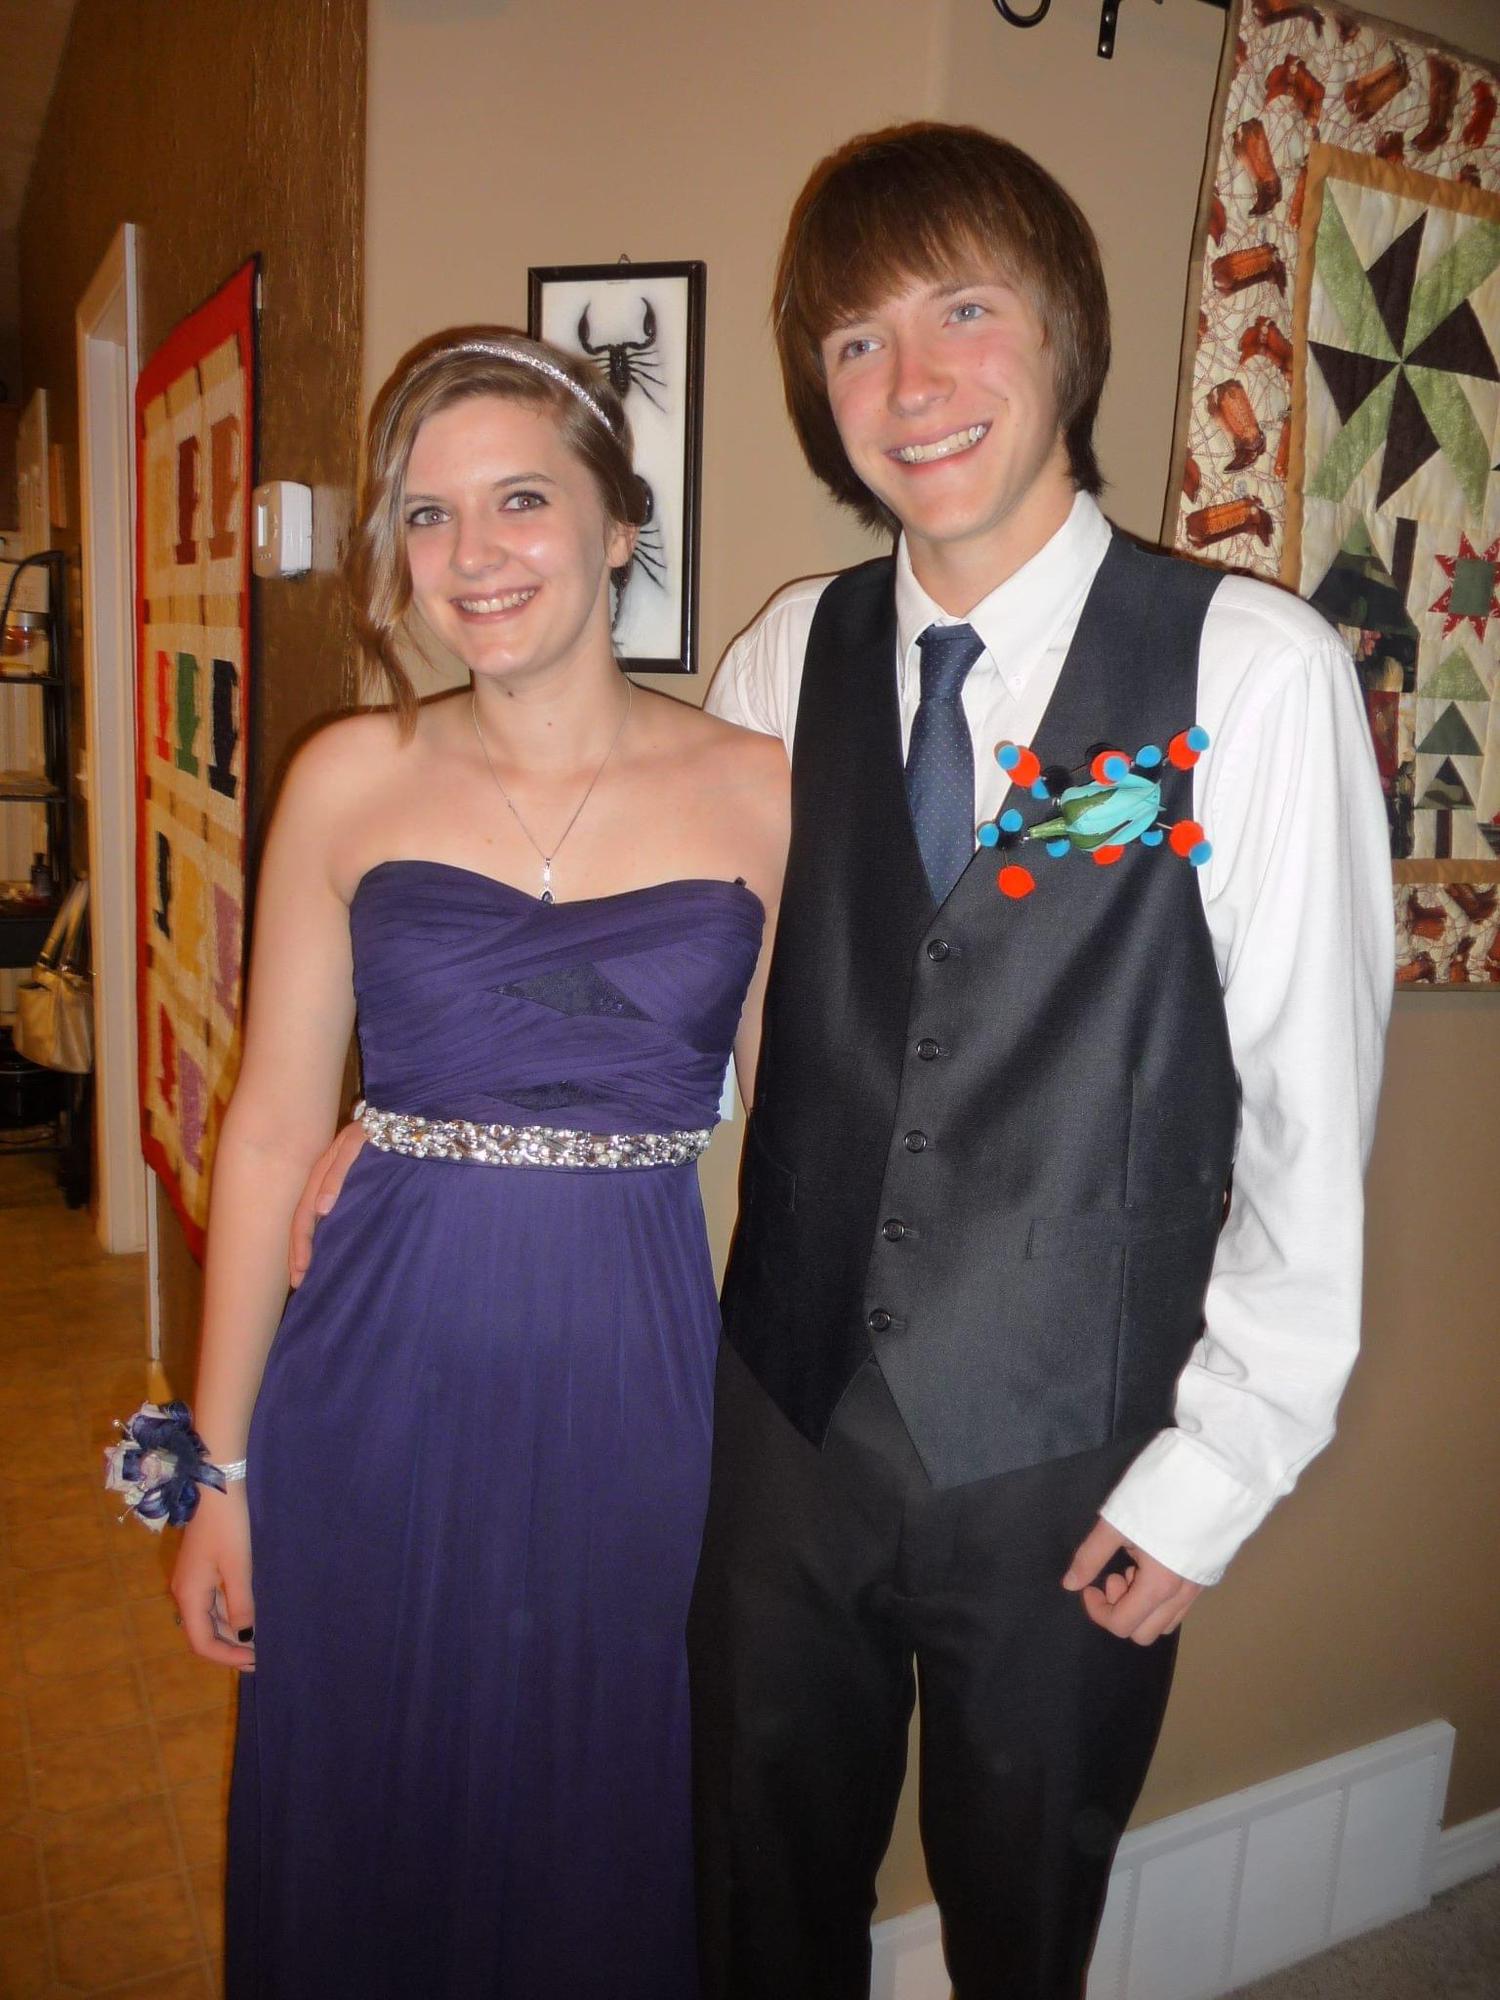 Second year going to prom together - 2015